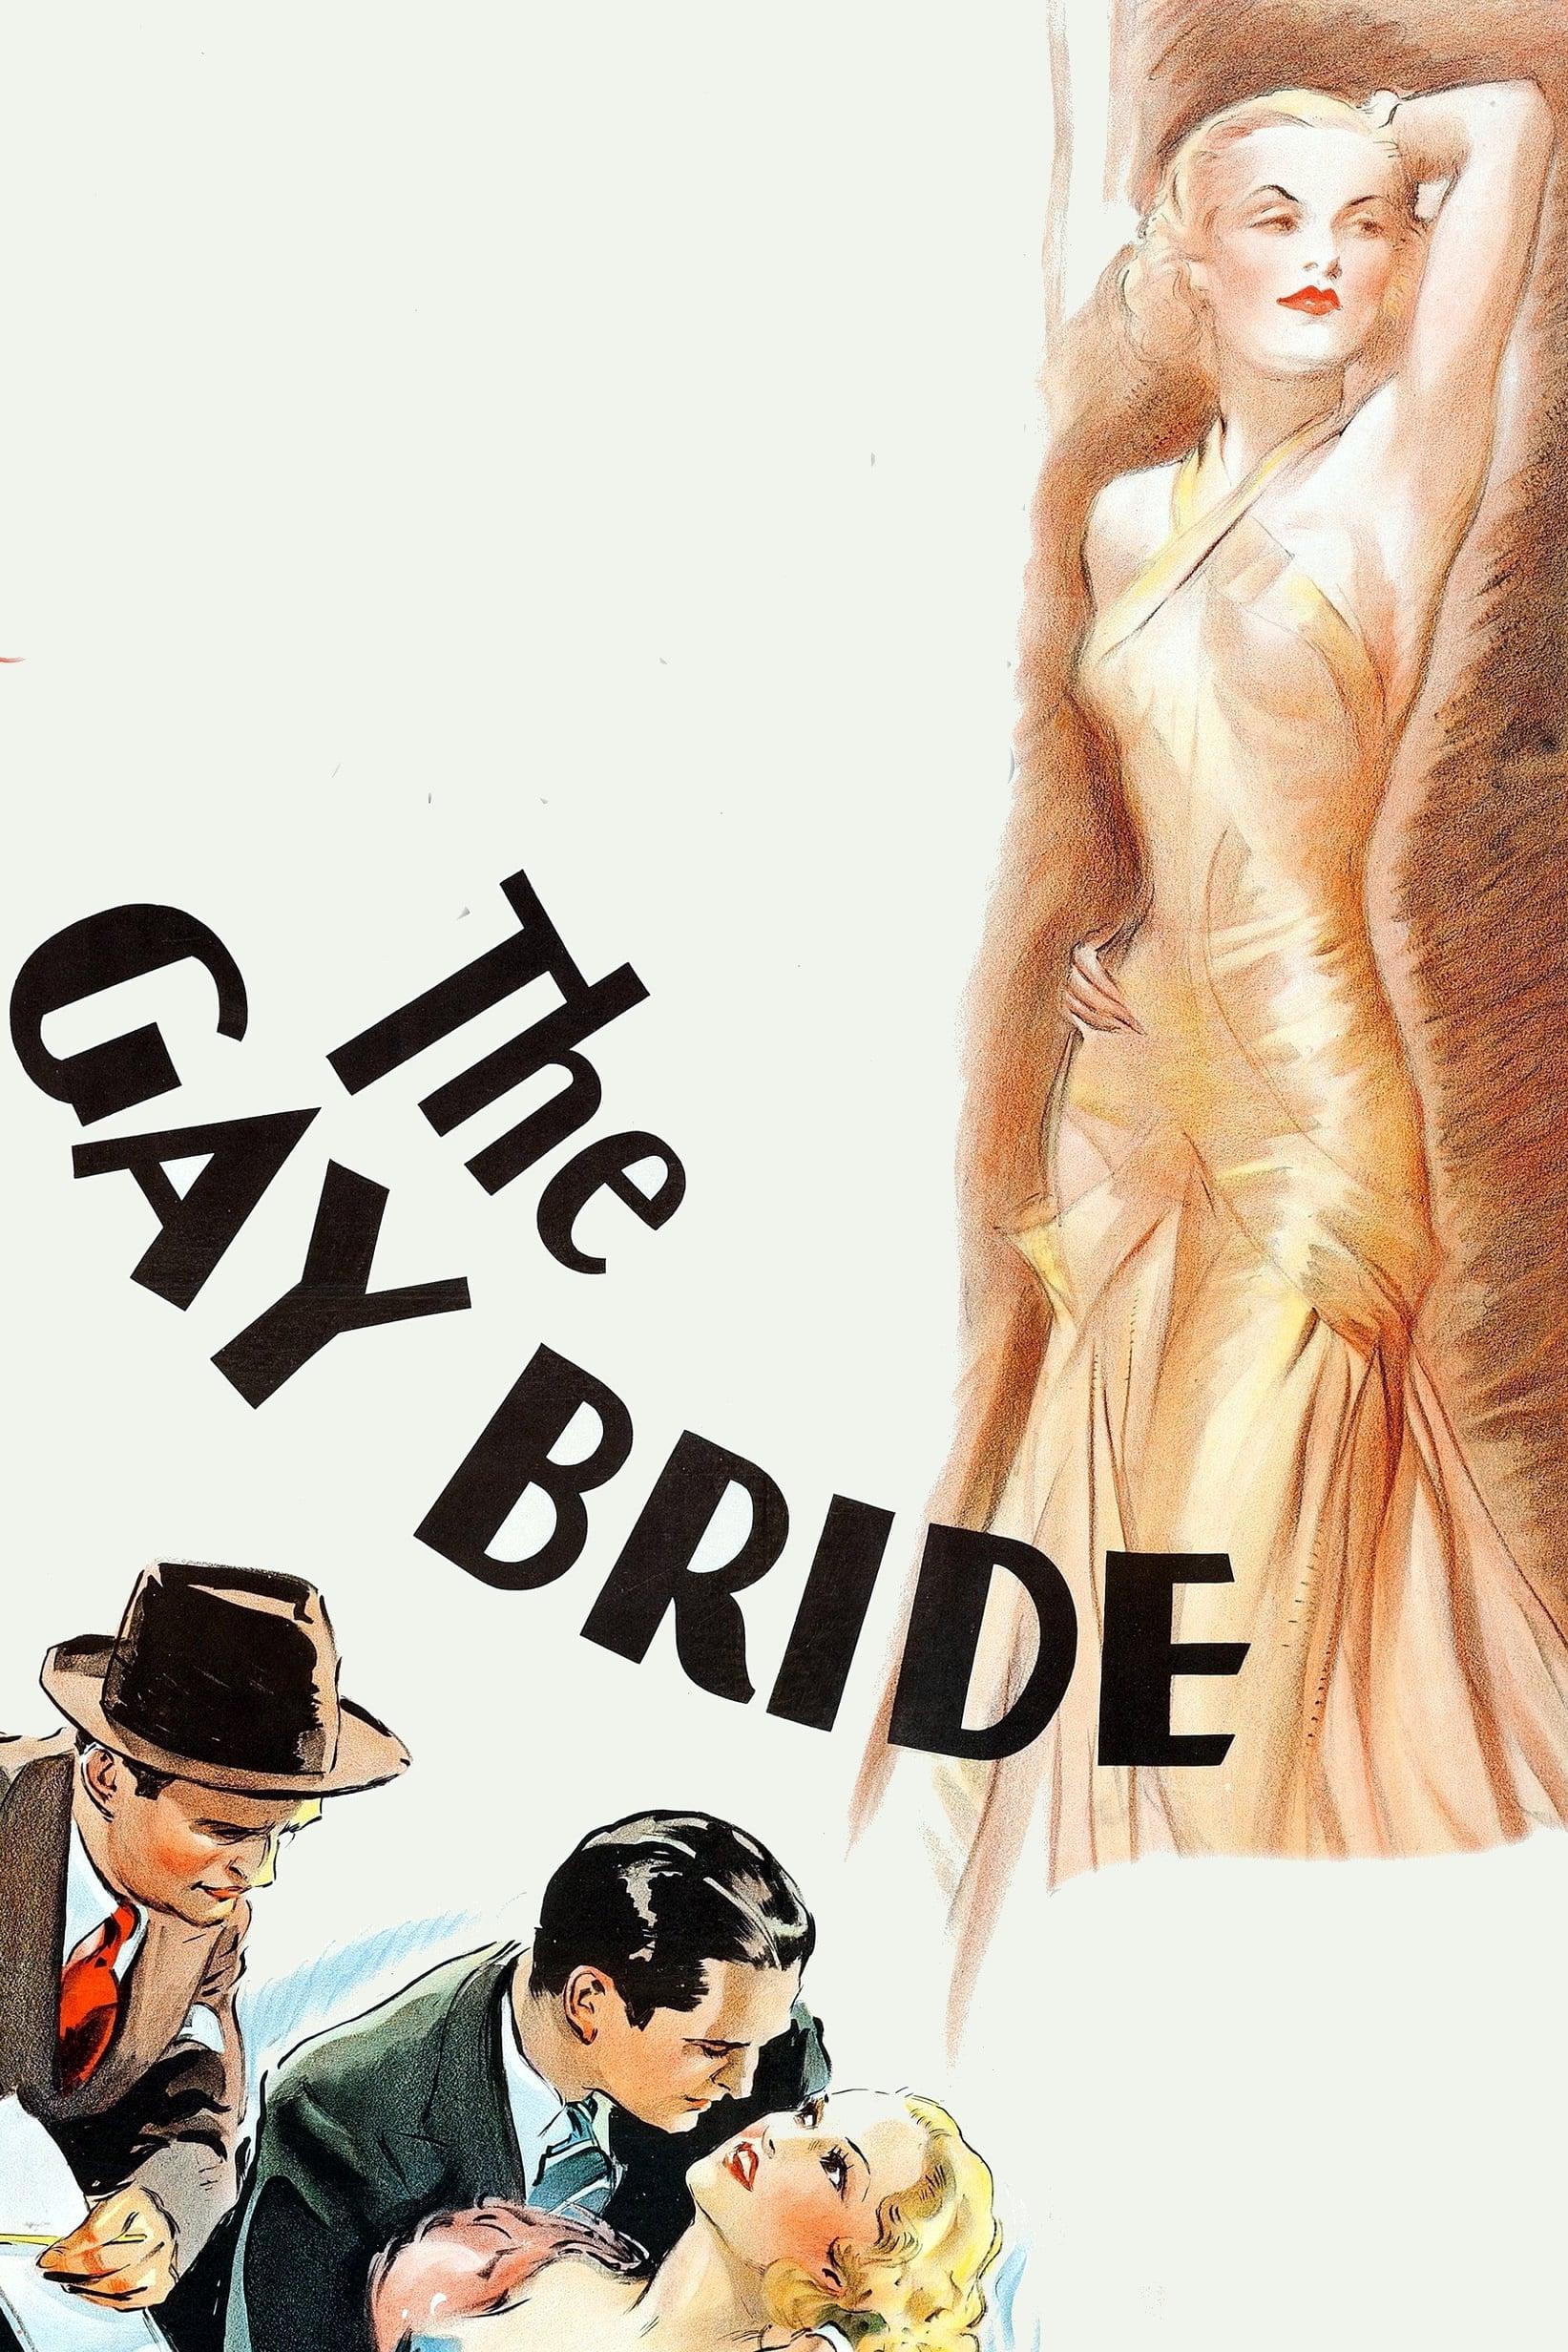 The Gay Bride poster